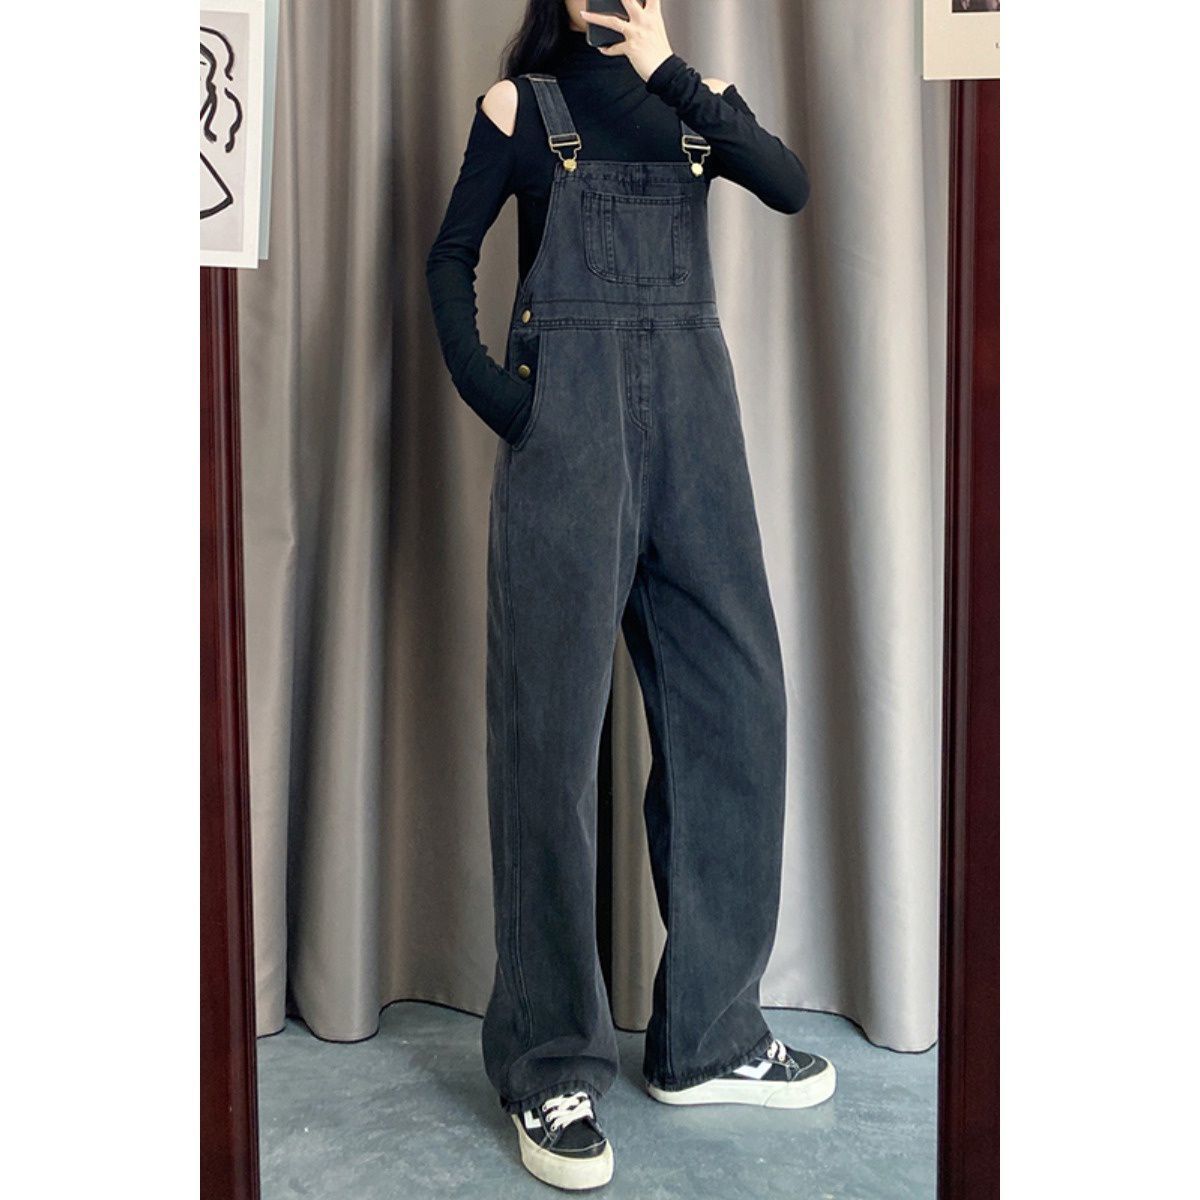 Lengthened 170 new Hong Kong-style denim overalls women's spring and autumn tall tall loose slim and age-reducing jumpsuit wide-leg pants